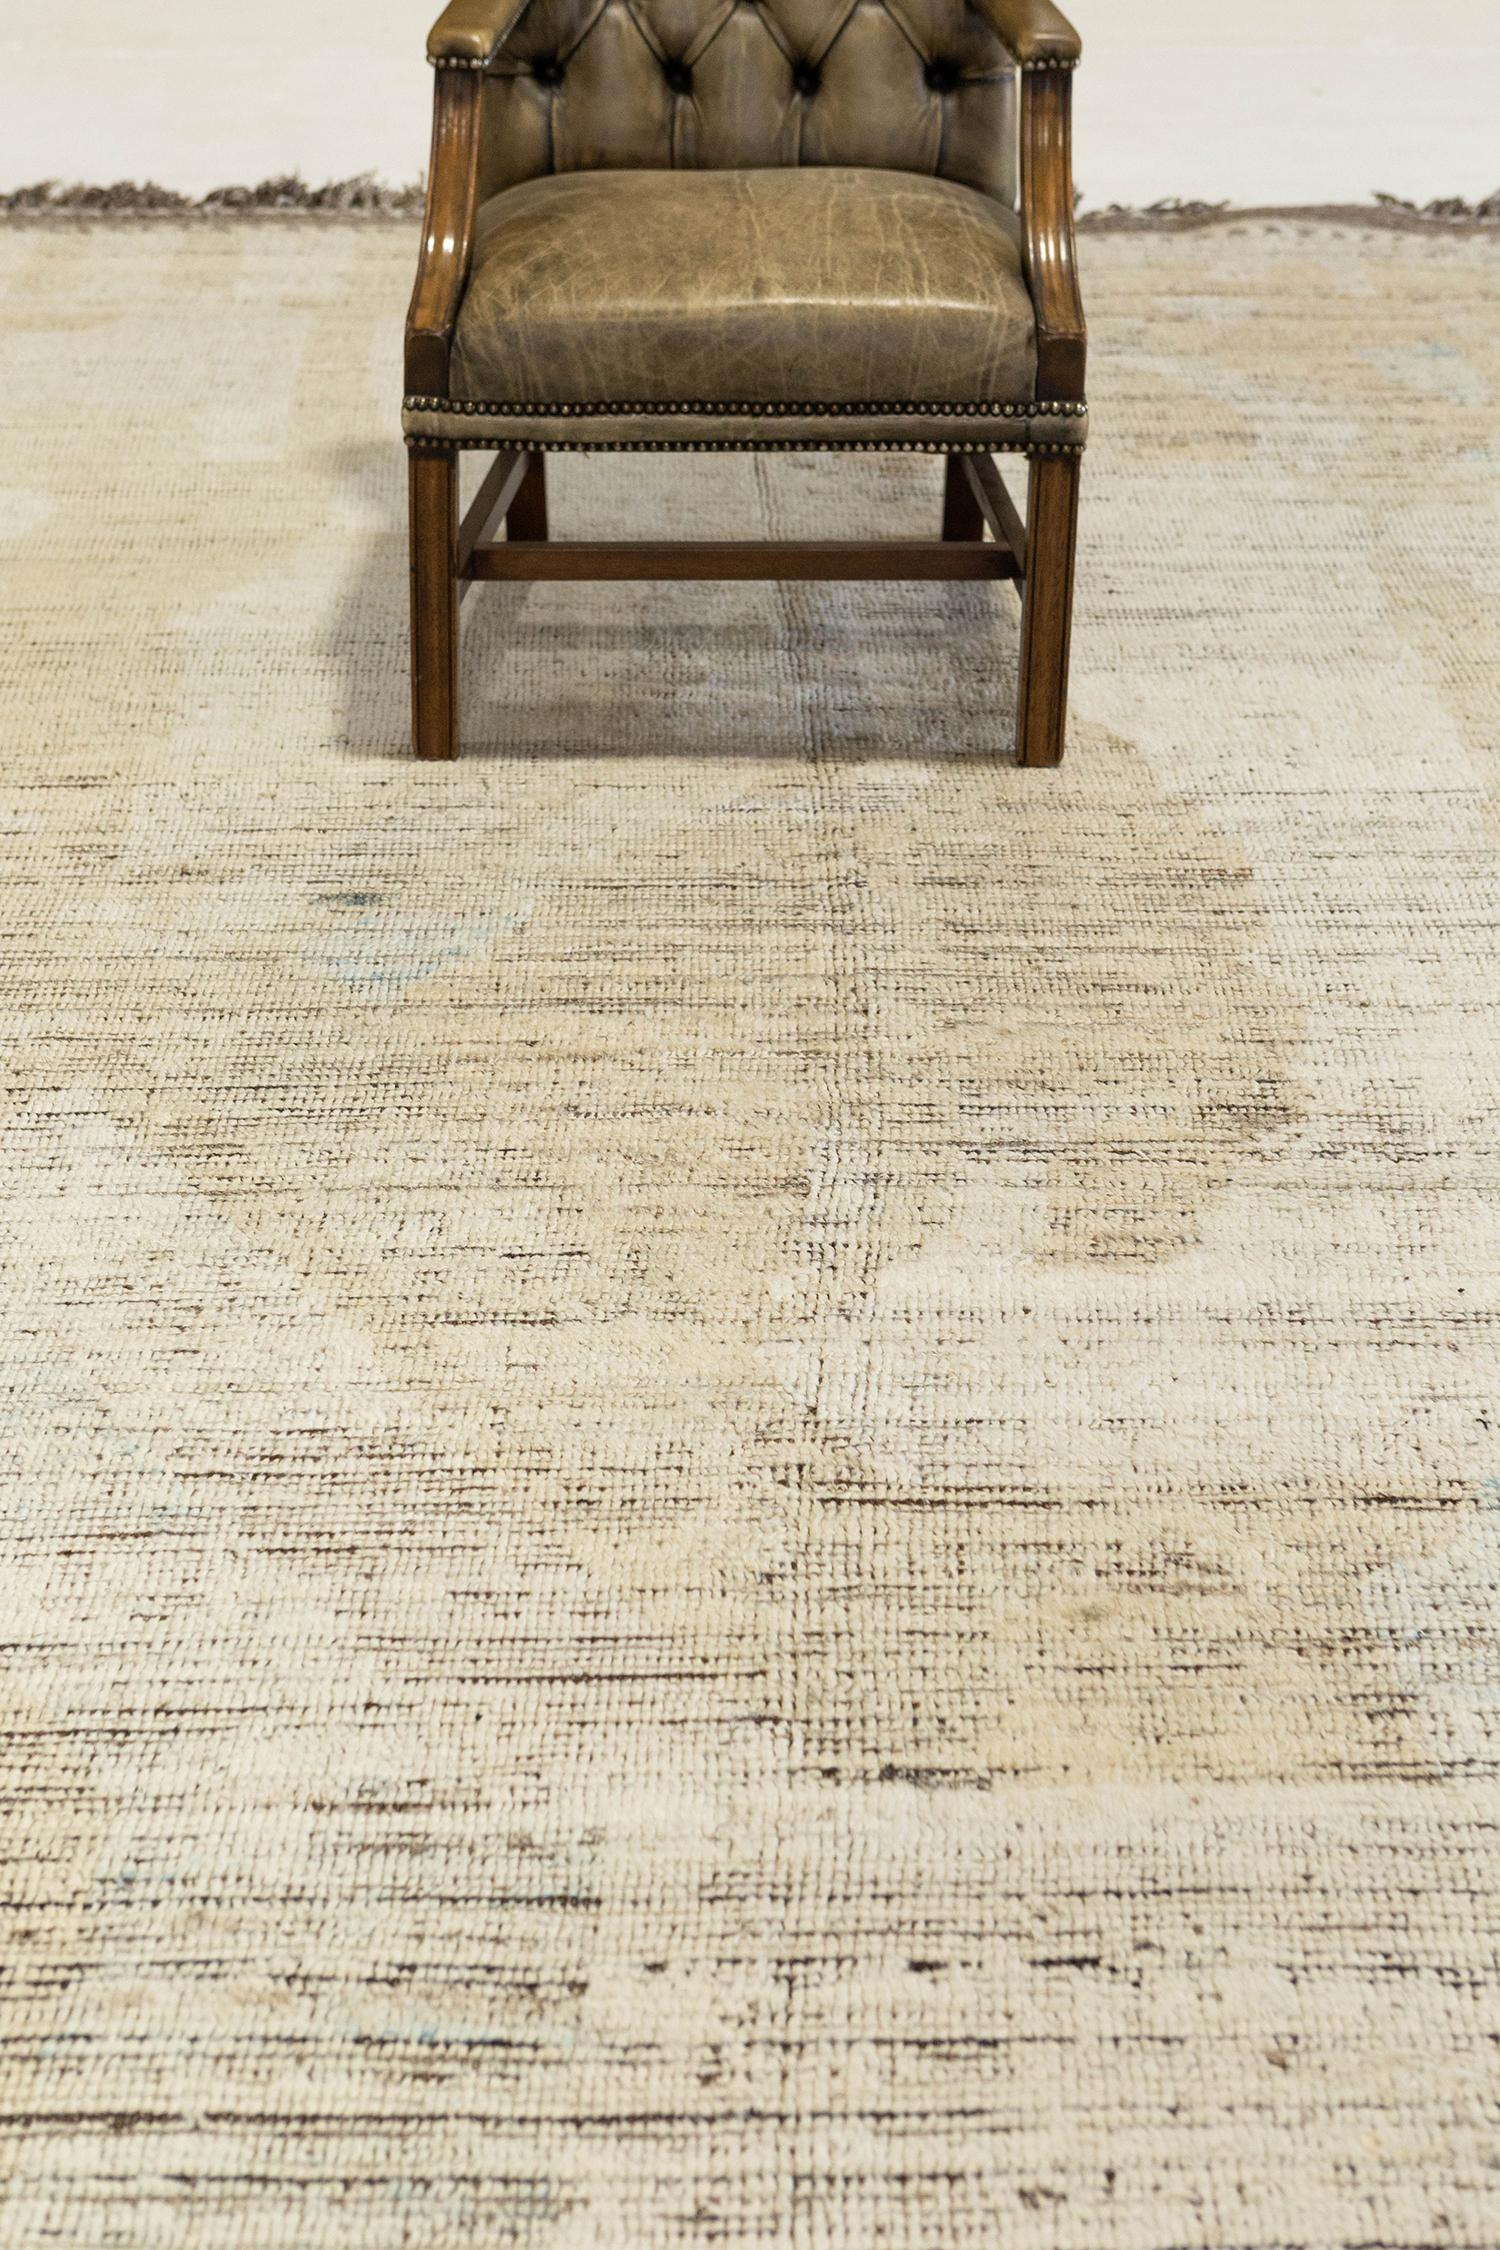 'Dakhla' is a beautifully textured rug with irregular motifs inspired from the Atlas Mountains of Morocco. Neutral colored shag atop a brown pile weave work cohesively to make for a great contemporary interpretation for the modern design world.